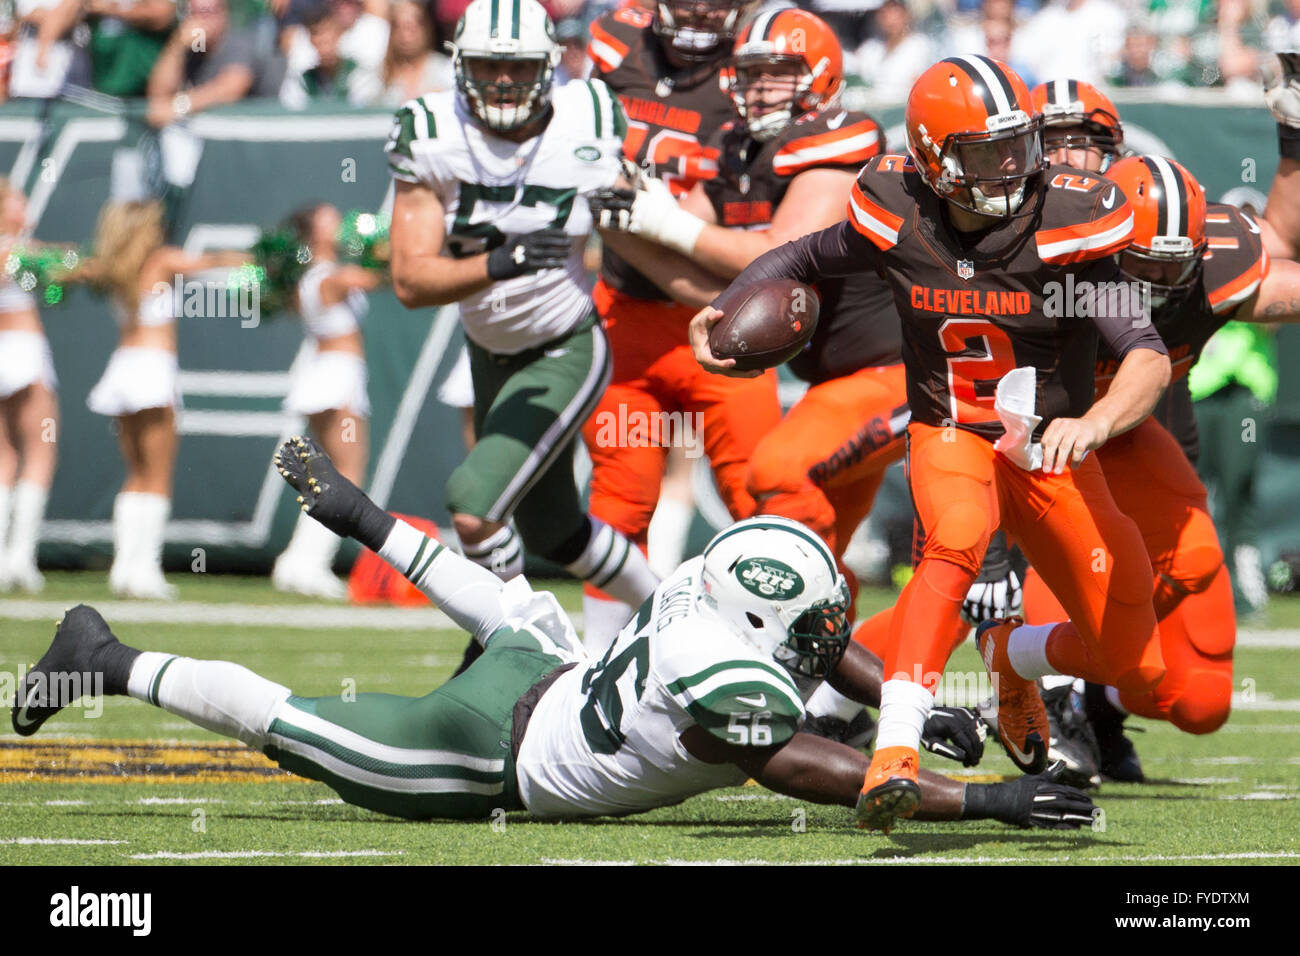 April 26, 2016 - Former Cleveland Browns quarterback Johnny Manziel indicted for domestic violence by a Dallas grand jury. Pictured: September 13, 2015, Cleveland Browns quarterback Johnny Manziel (2) scrambles with the ball as he gets past New York Jets inside linebacker Demario Davis (56), but the play will be nullified due to a flag, during the NFL game between the Cleveland Browns and the New York Jets at MetLife Stadium in East Rutherford, New Jersey. The New York Jets won 31-10. Christopher Szagola/CSM © Cal Sport Media/Alamy Live News Stock Photo